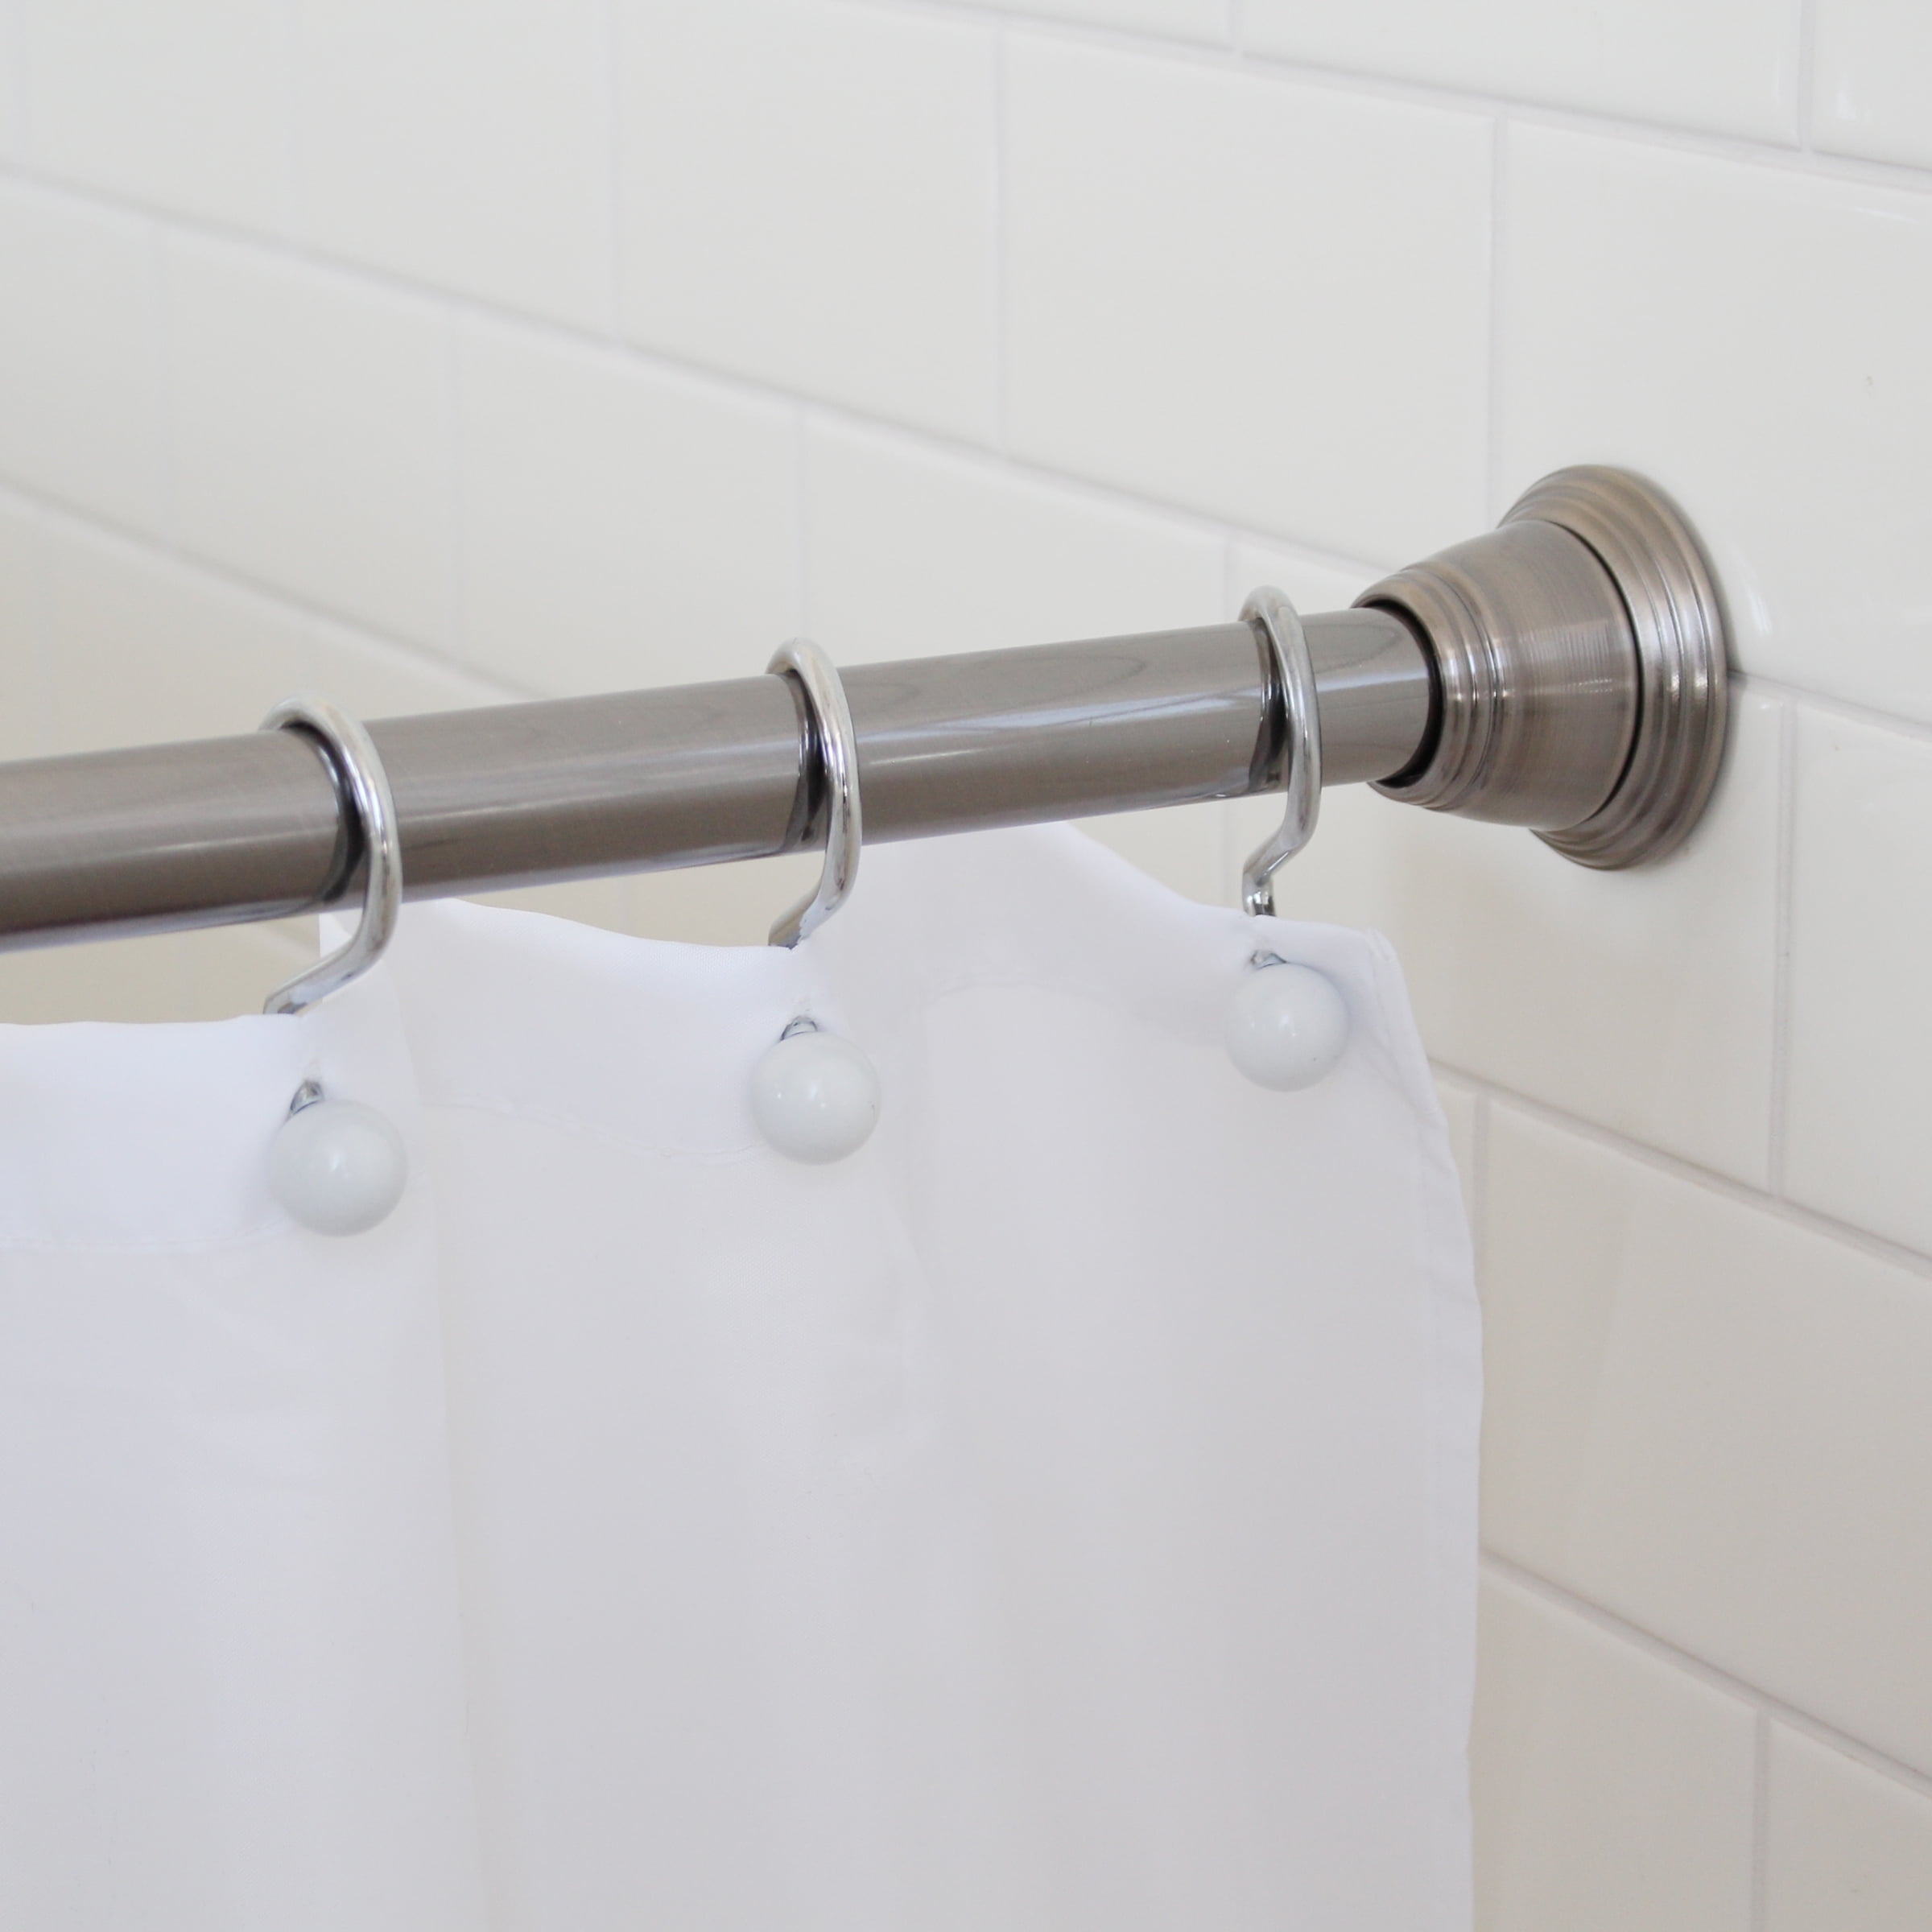 Splash Home Eire Rust Resistant Strong, Tub Surround Shower Curtain Rod